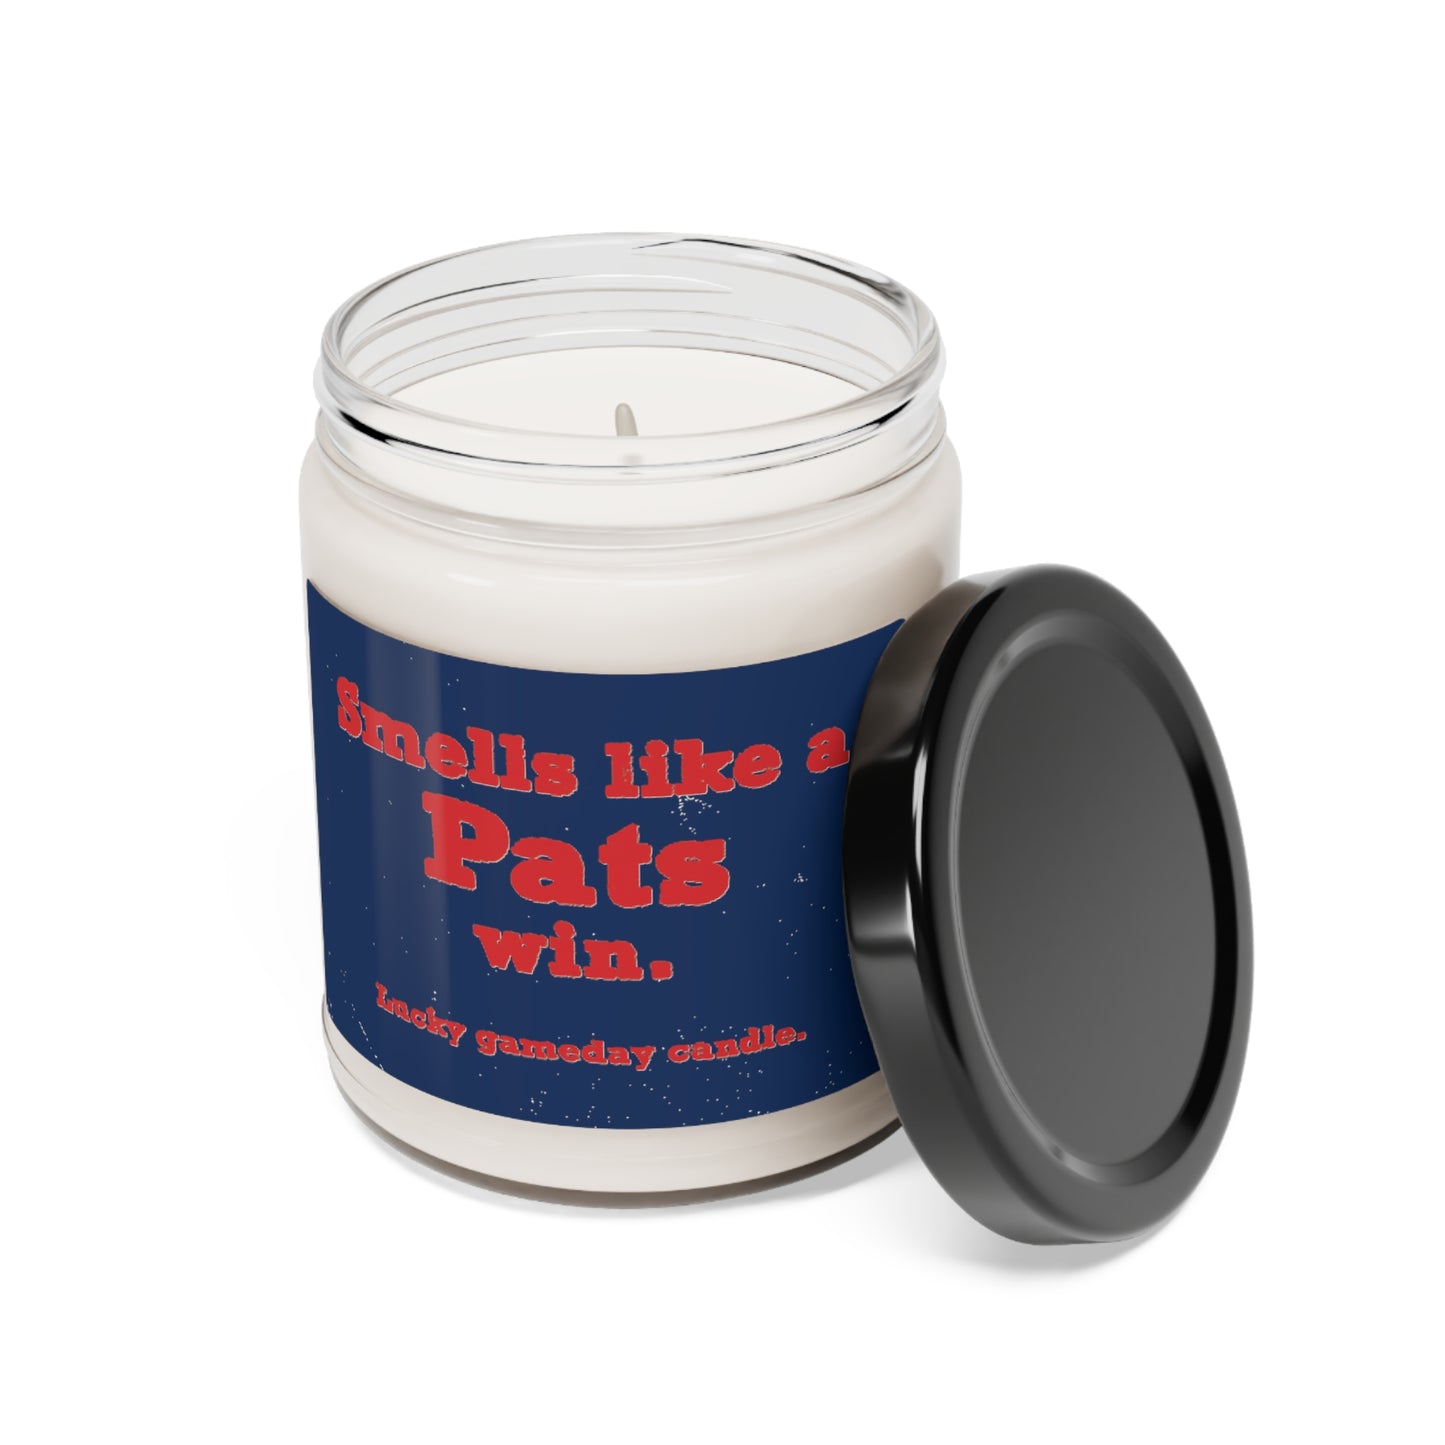 New England Football - "Smells Like a Pats Win" Scented Candle